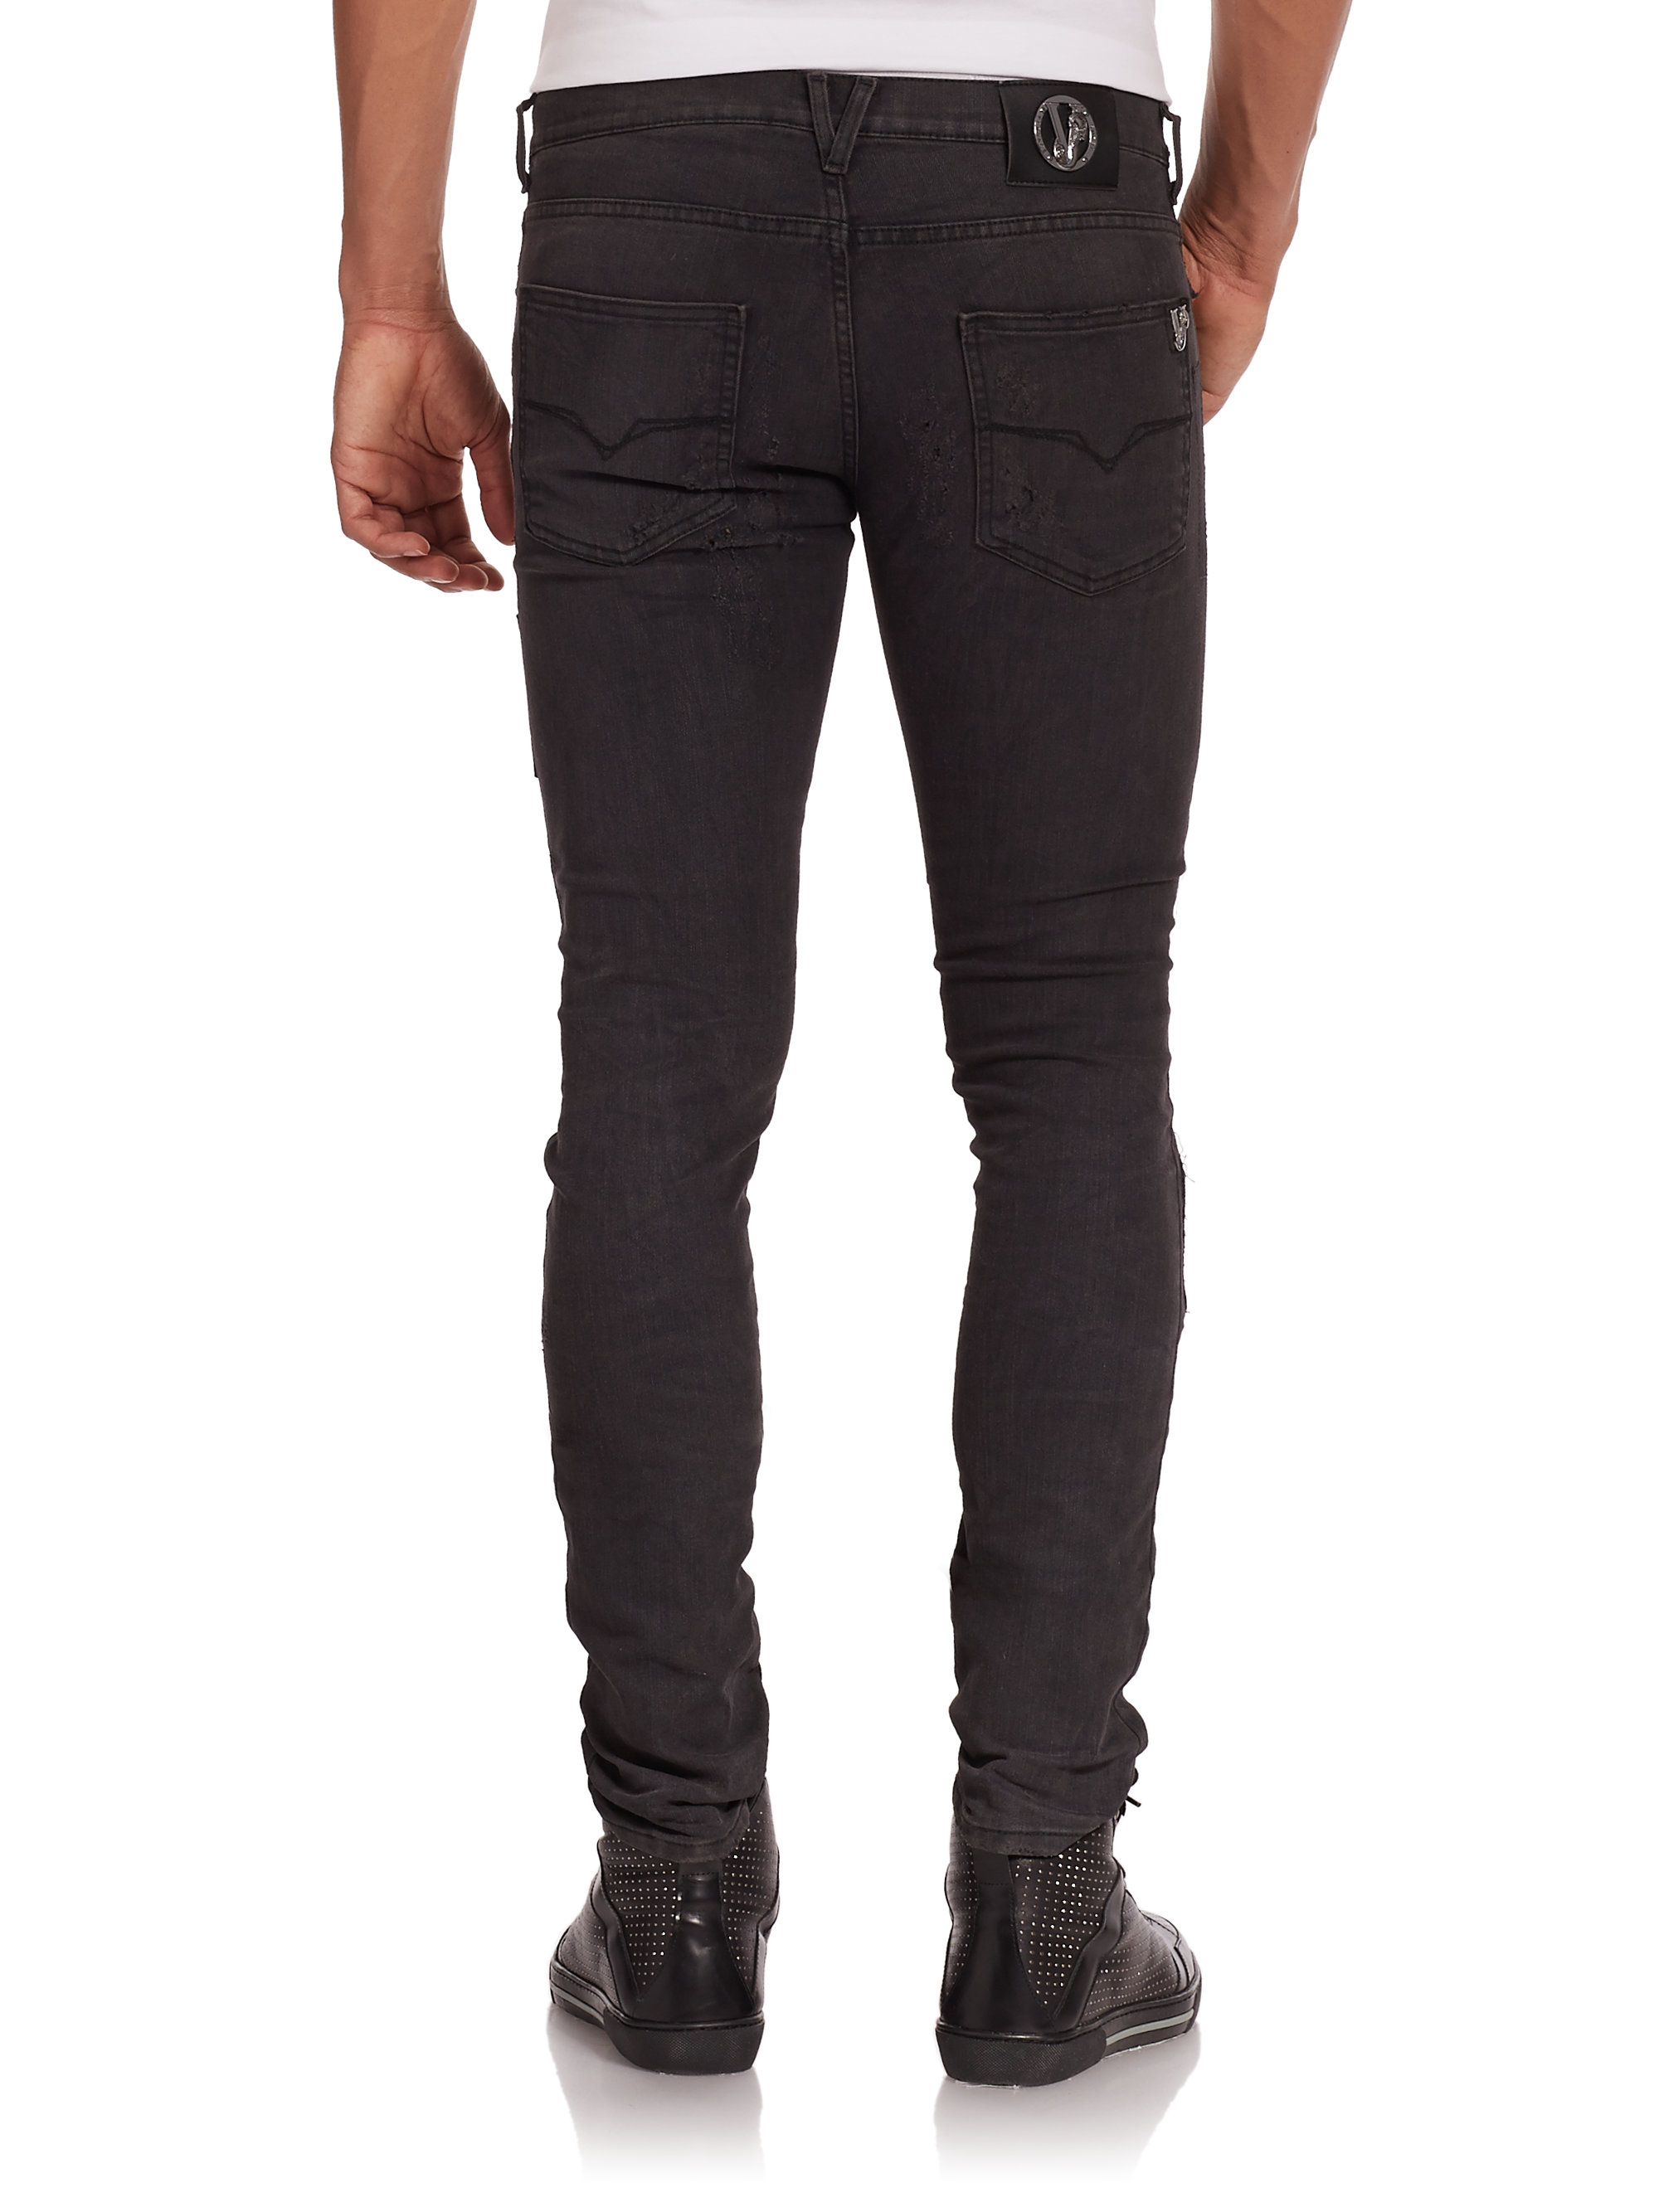 Versace Jeans Distressed Skinny Jeans in Black for Men - Lyst